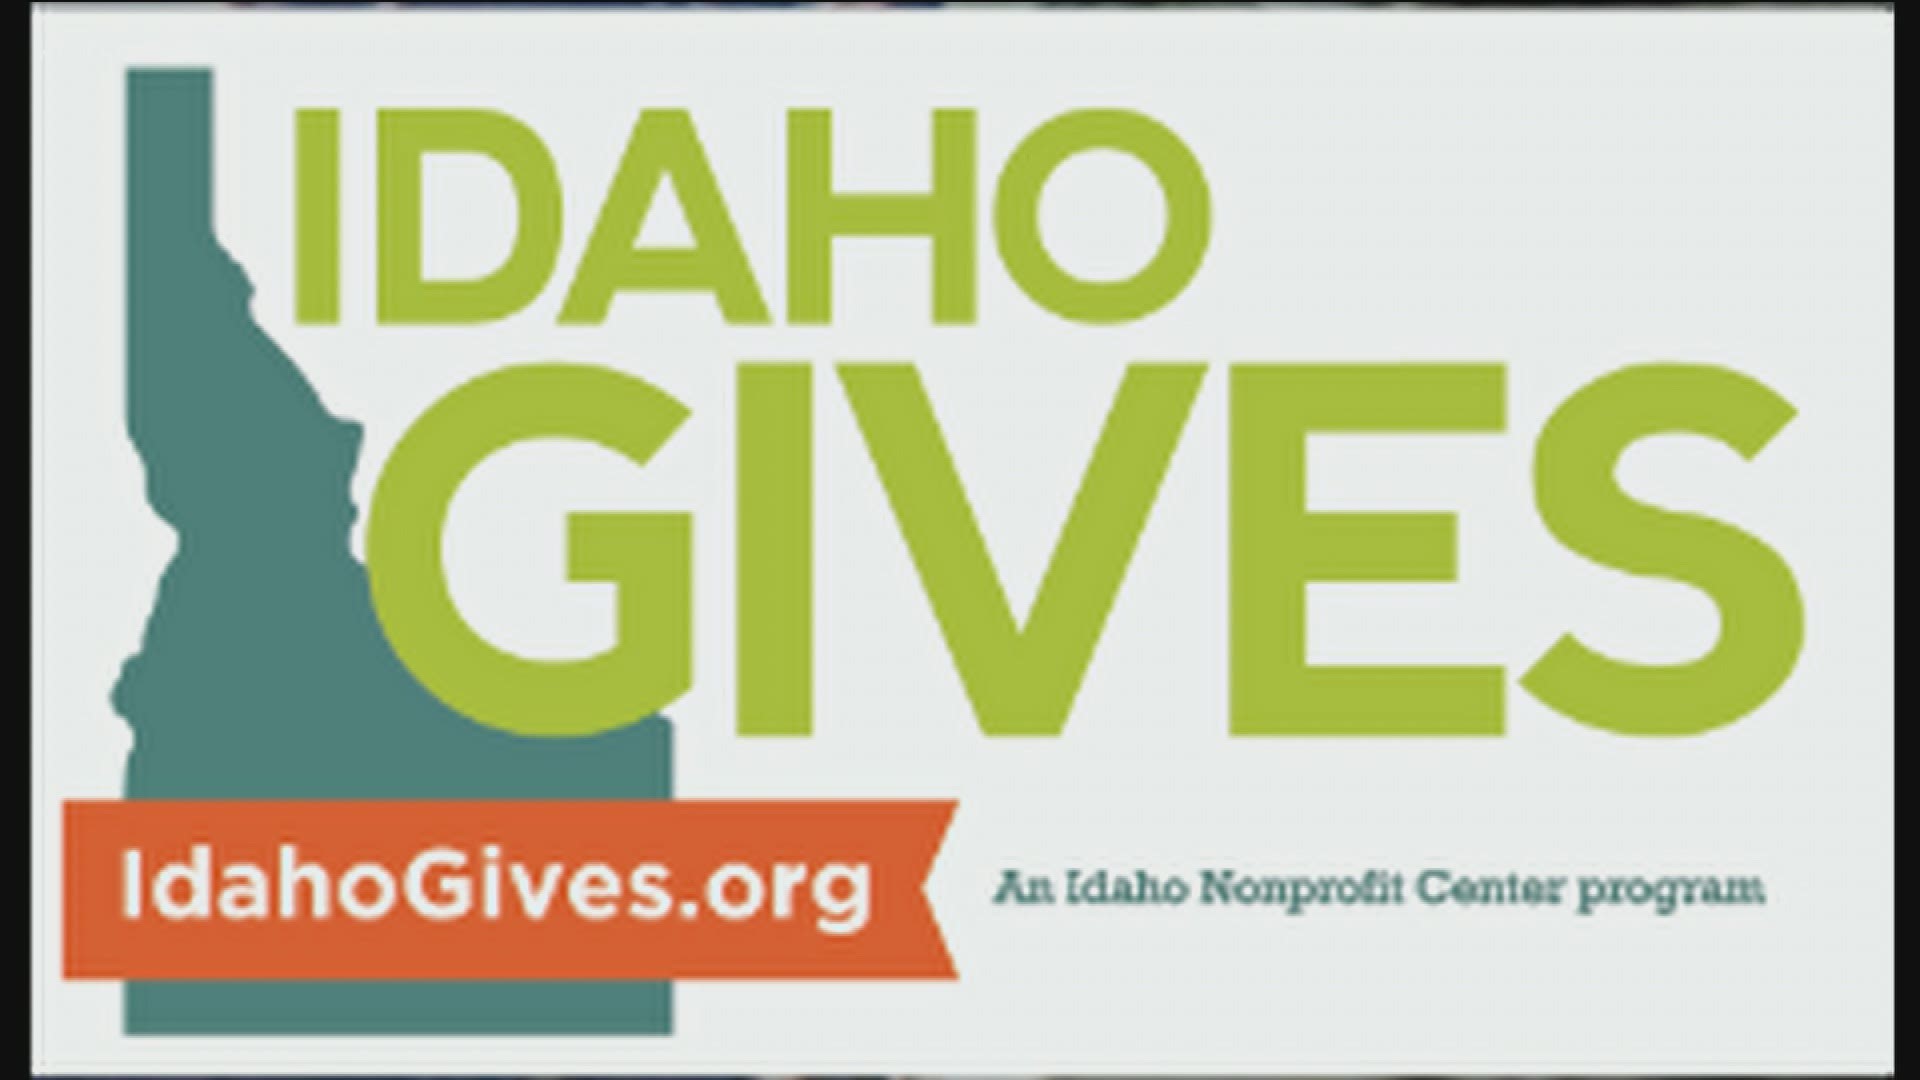 More than 650 Idaho nonprofits are signed up to participate in this year's event.